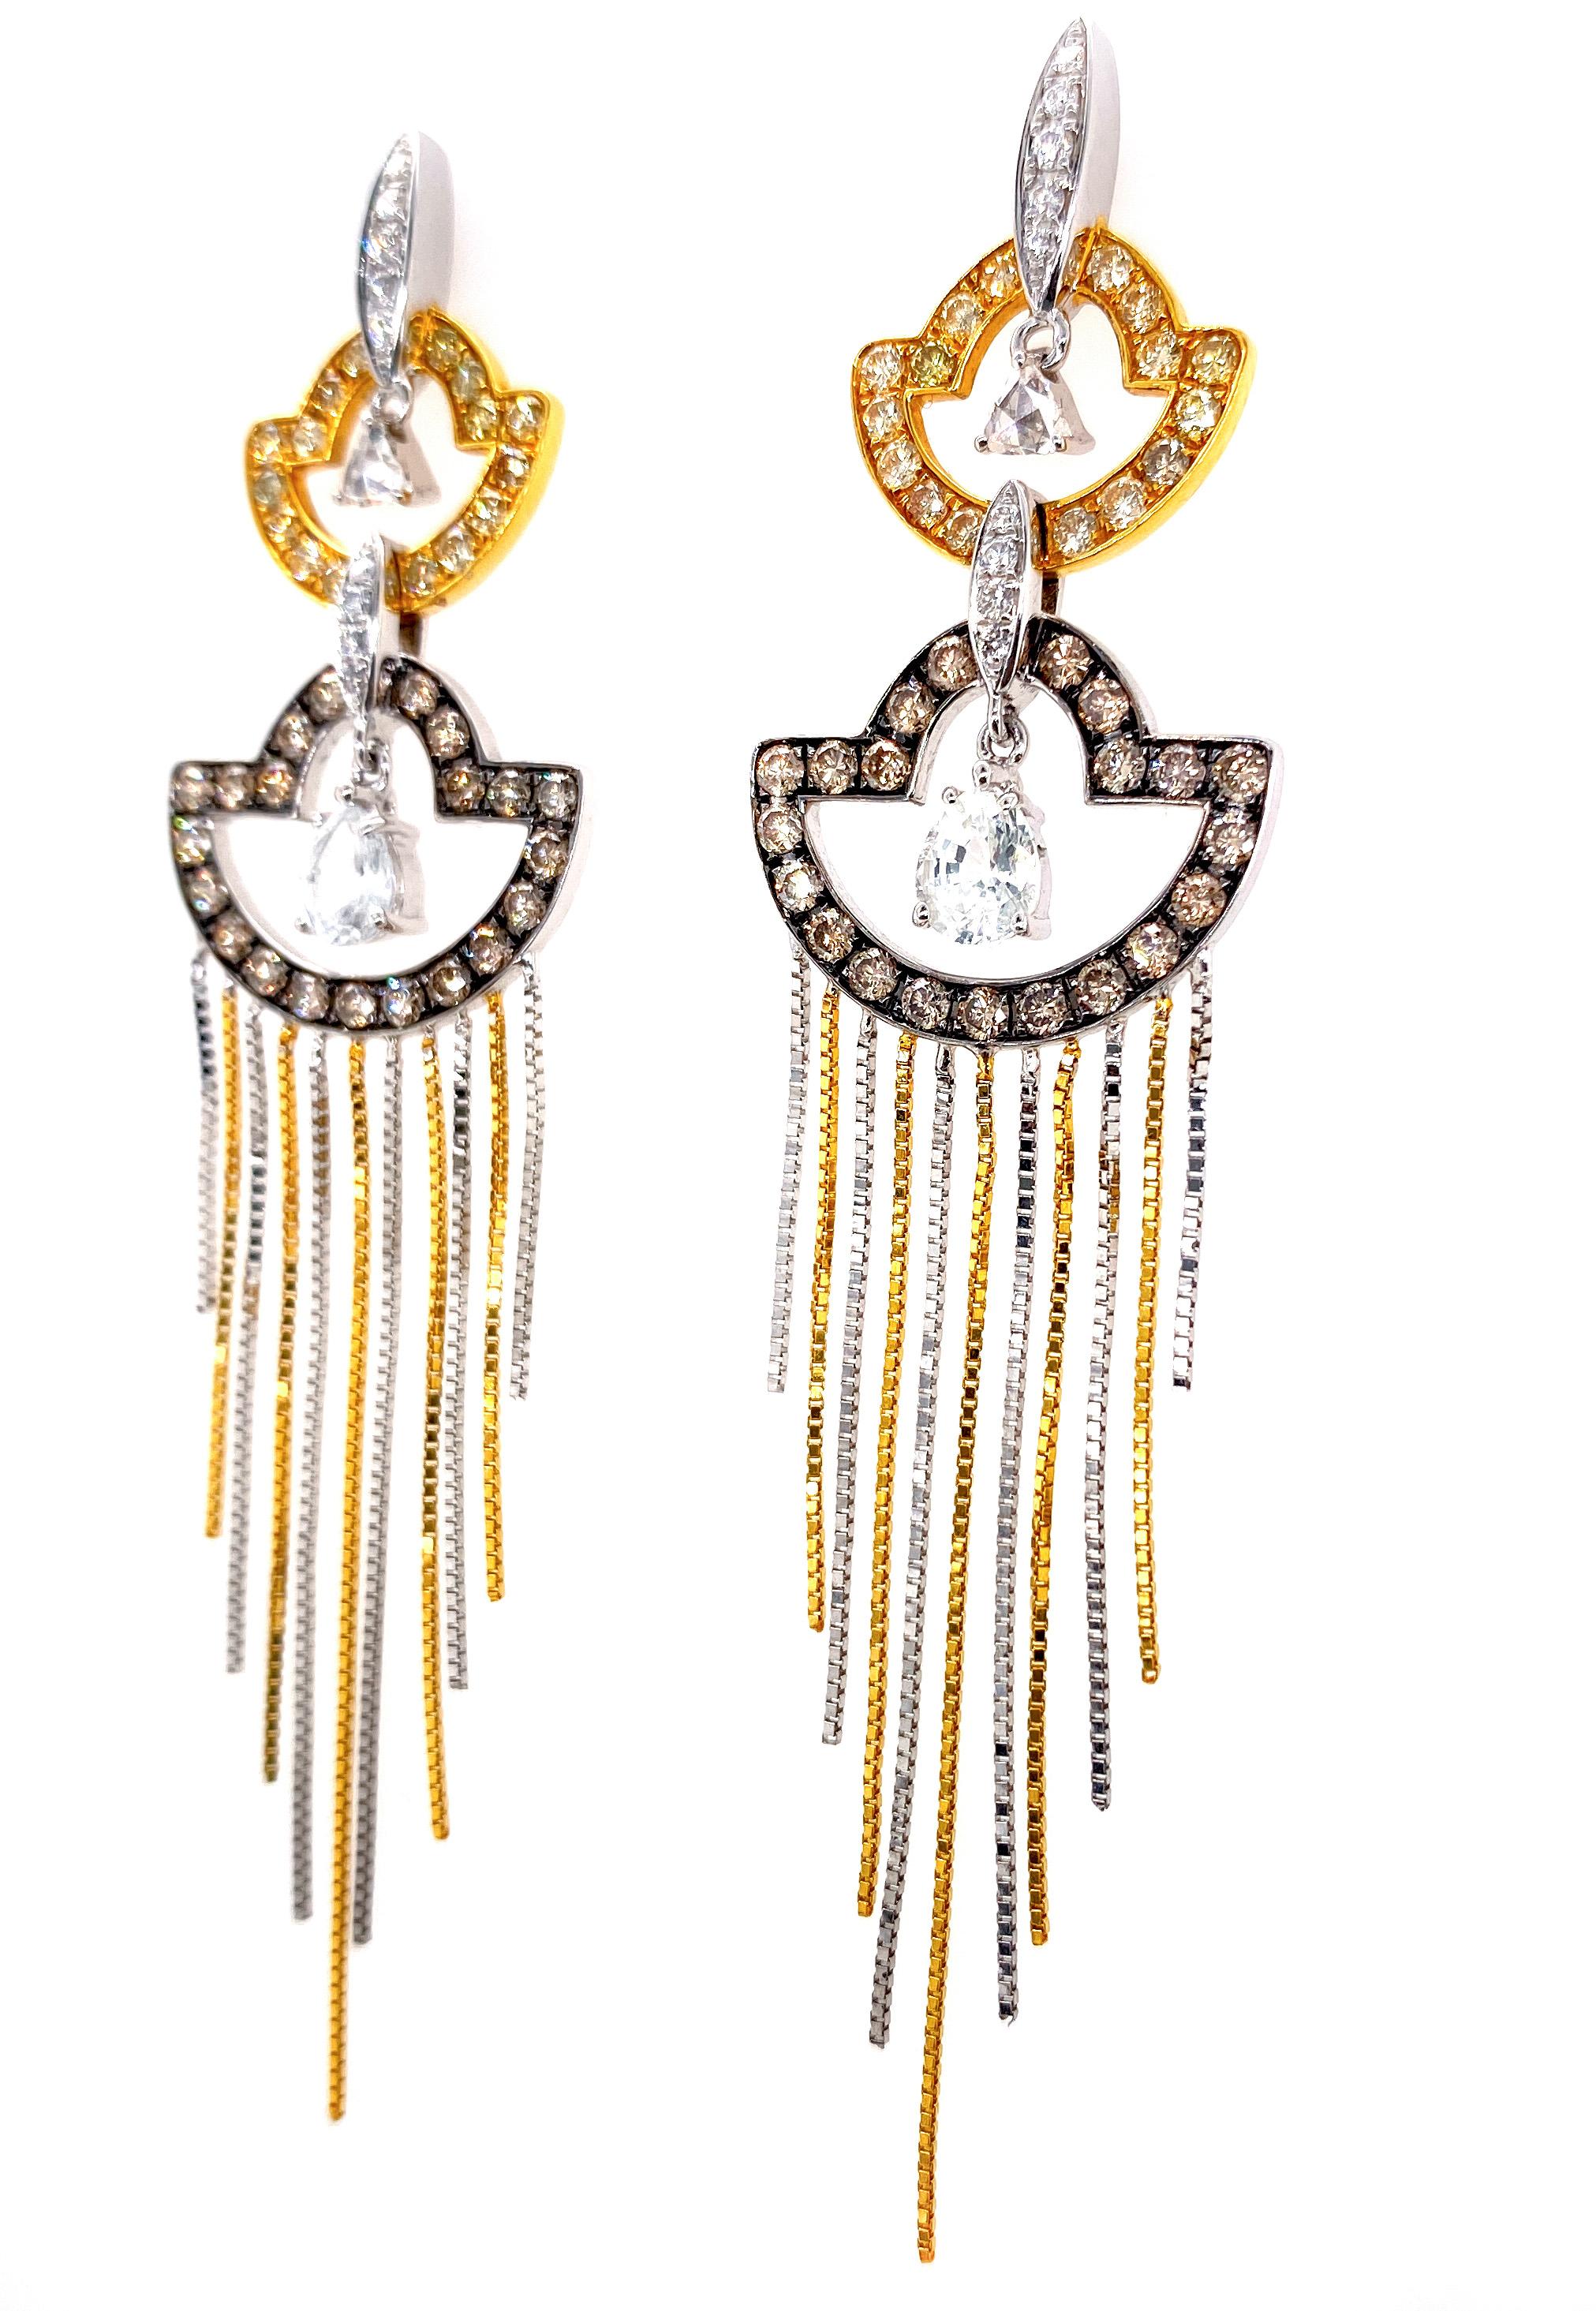 A stunning pair of 18 karat yellow, white and black gold earrings by Dilys’, designed with a touch of Old Hollywood grandeur. Set with 74 fancy color diamonds totaling 1.28 carats, 20 white diamonds totaling .25 carat and 2 white sapphires, the